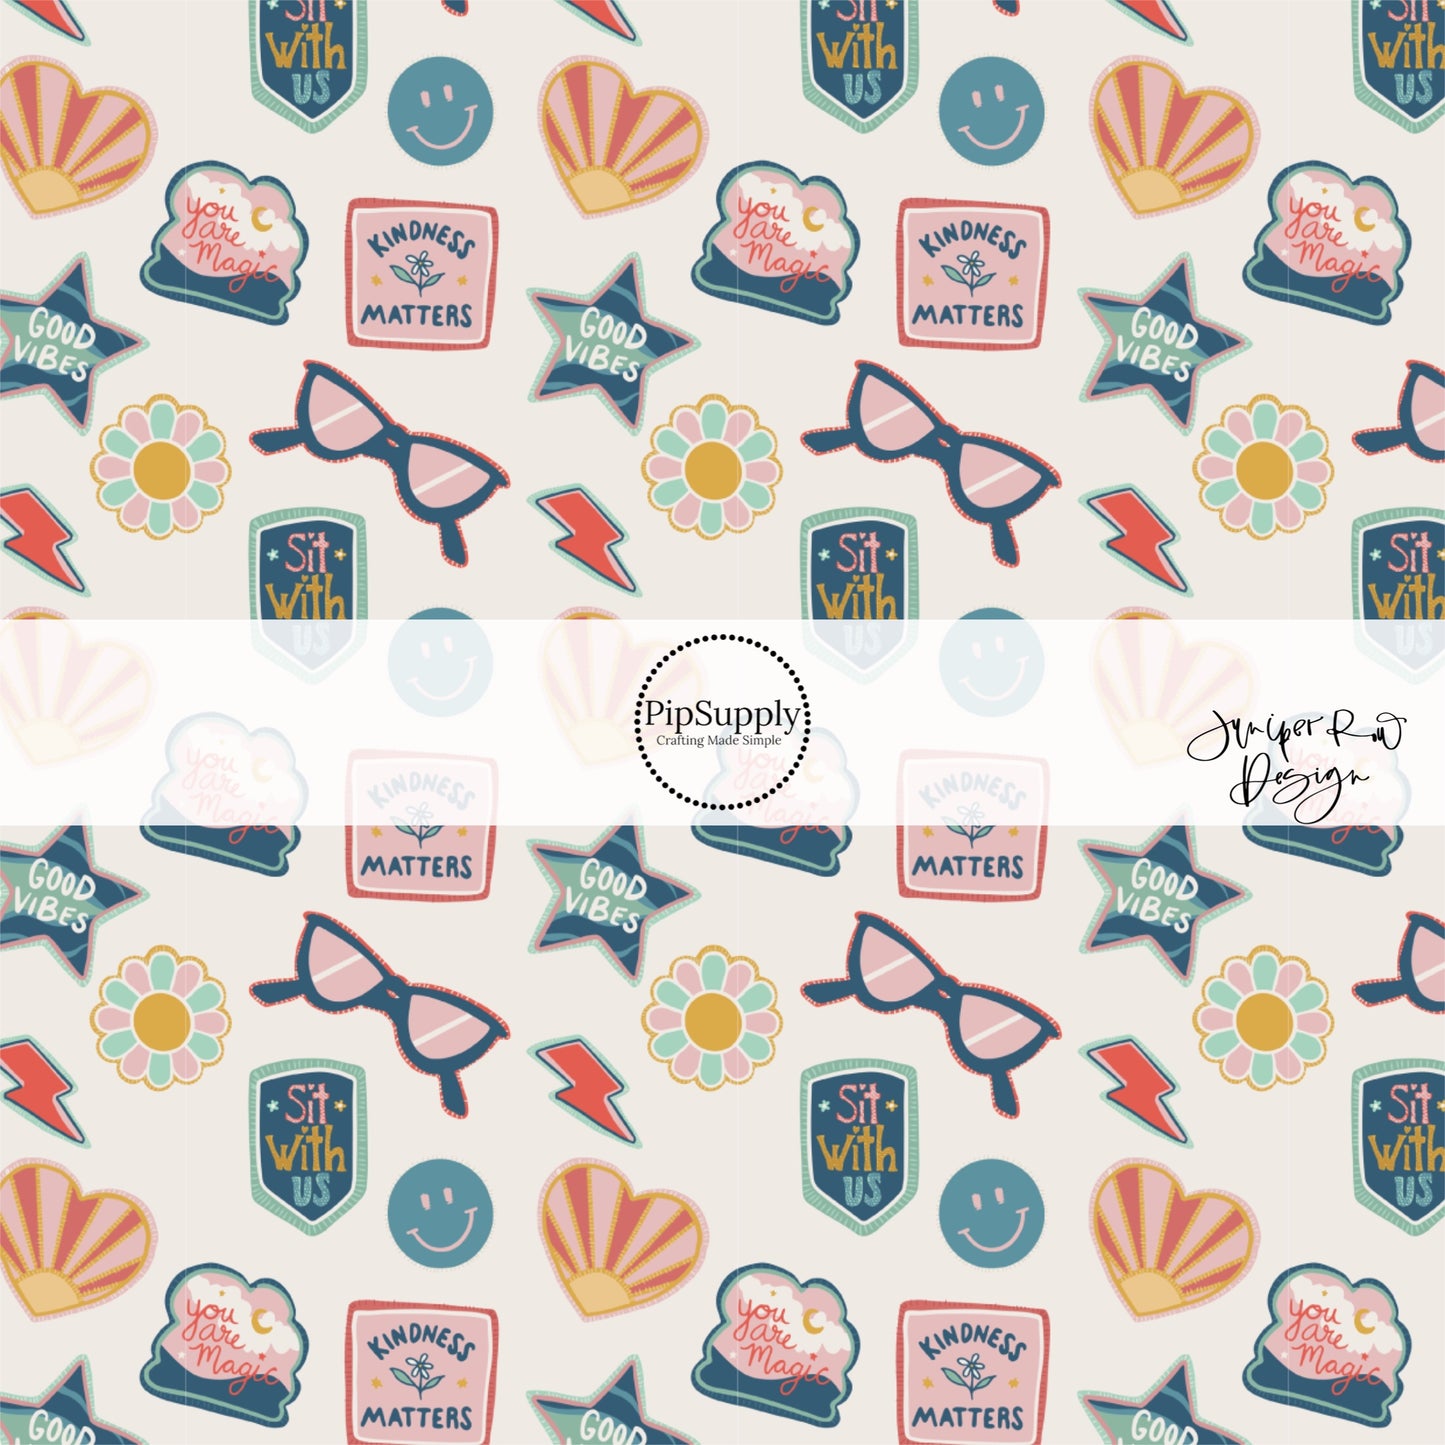 Smiley faces, glasses, lightning bolts, and flowers school themed stickers on cream fabric by the yard.